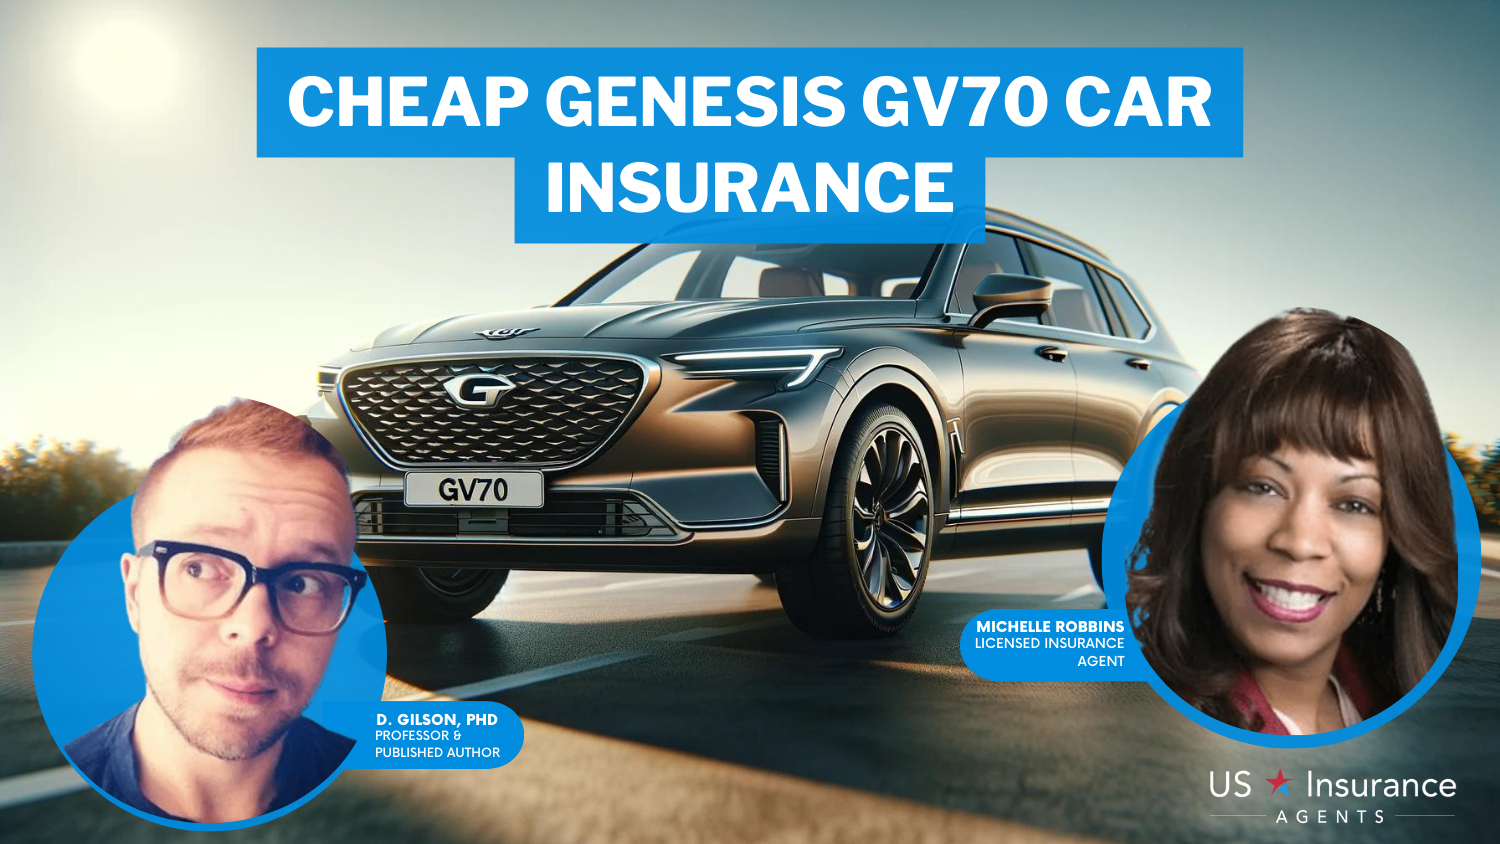 Cheap Genesis GV70 Car Insurance: Erie, Safeco, and Auto-Owners